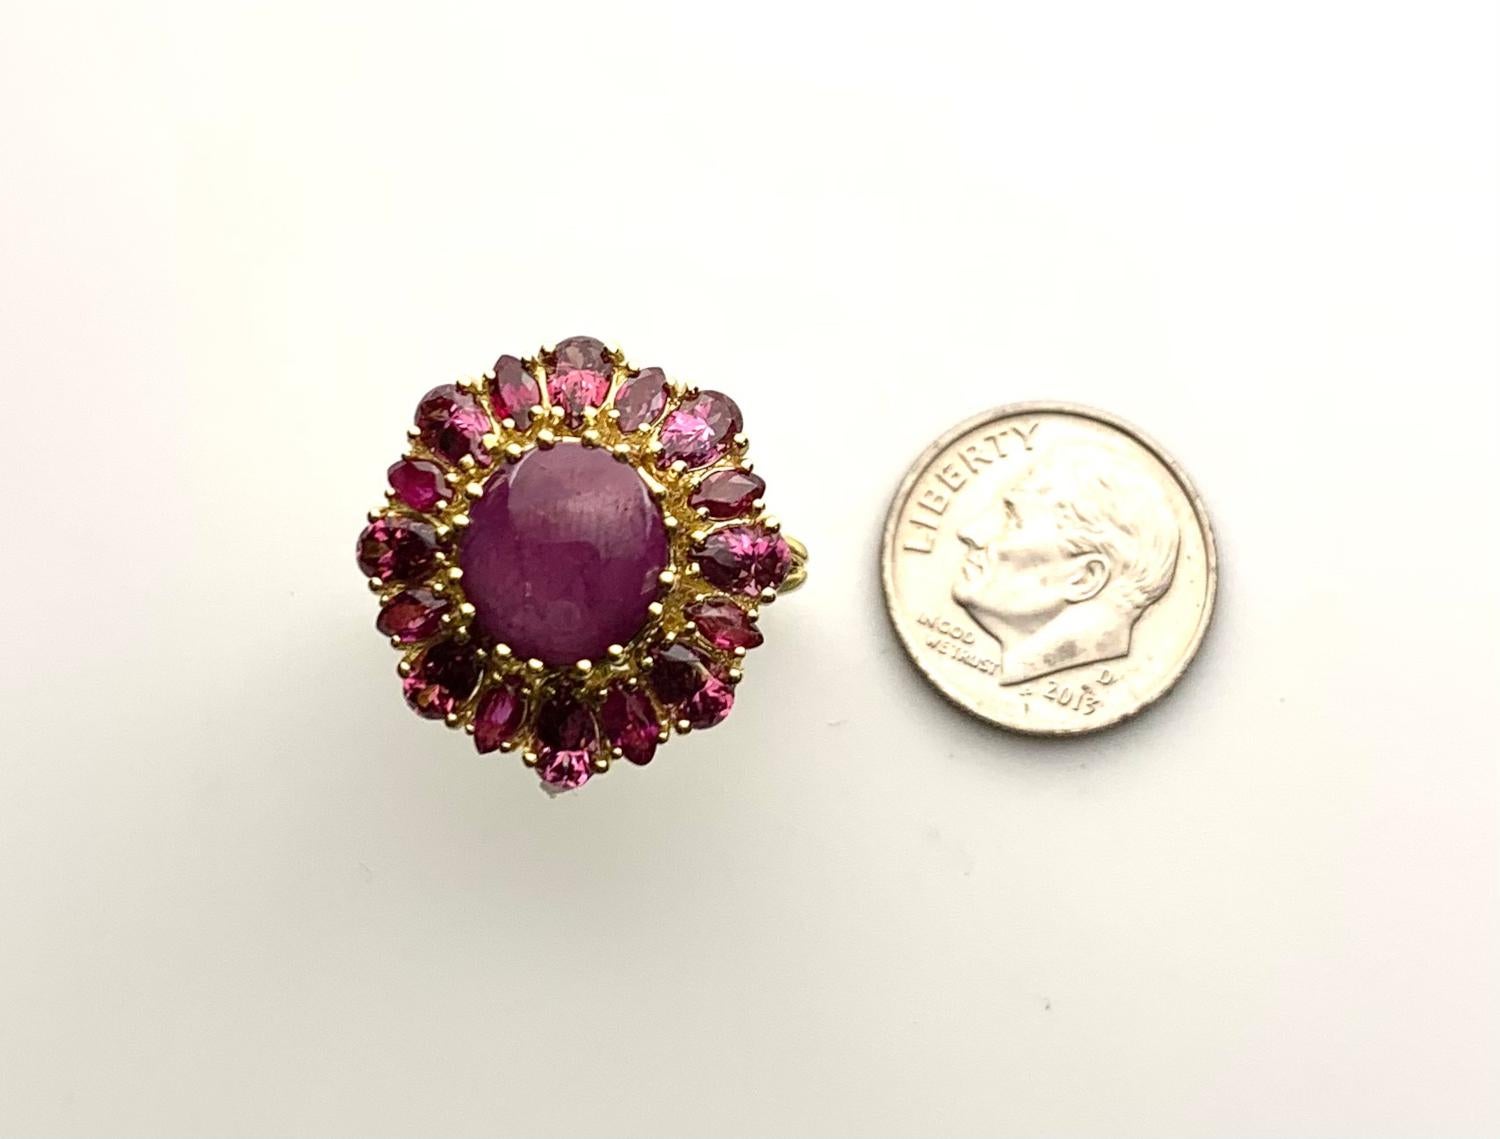 Cabochon 5.83 Carat Star Ruby and Pink Rose Garnet Starburst Cocktail Ring in Yellow Gold For Sale